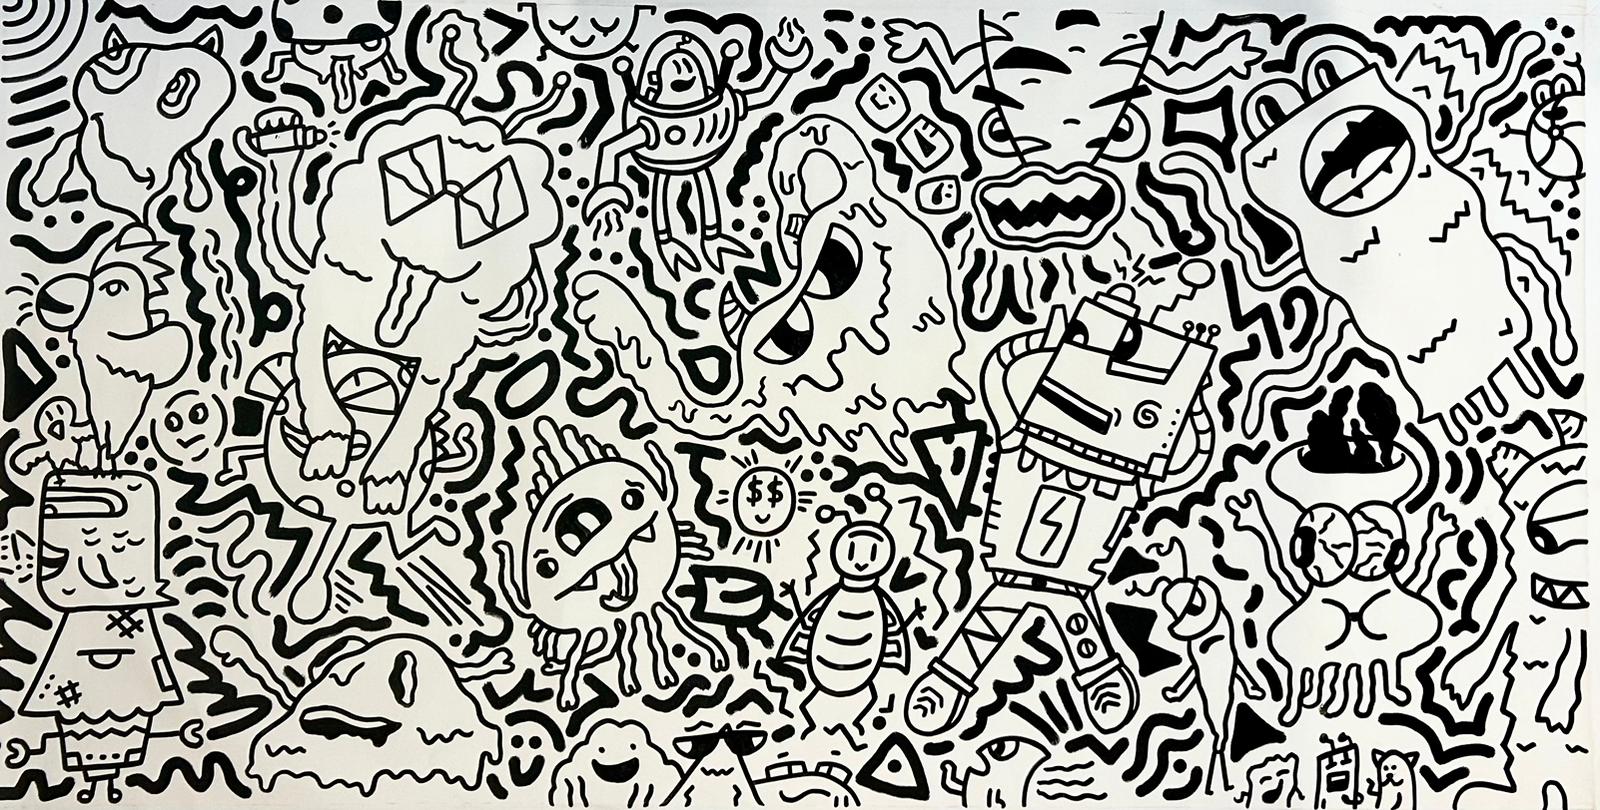 Madness , 180x95, Marker on Canvas,2023